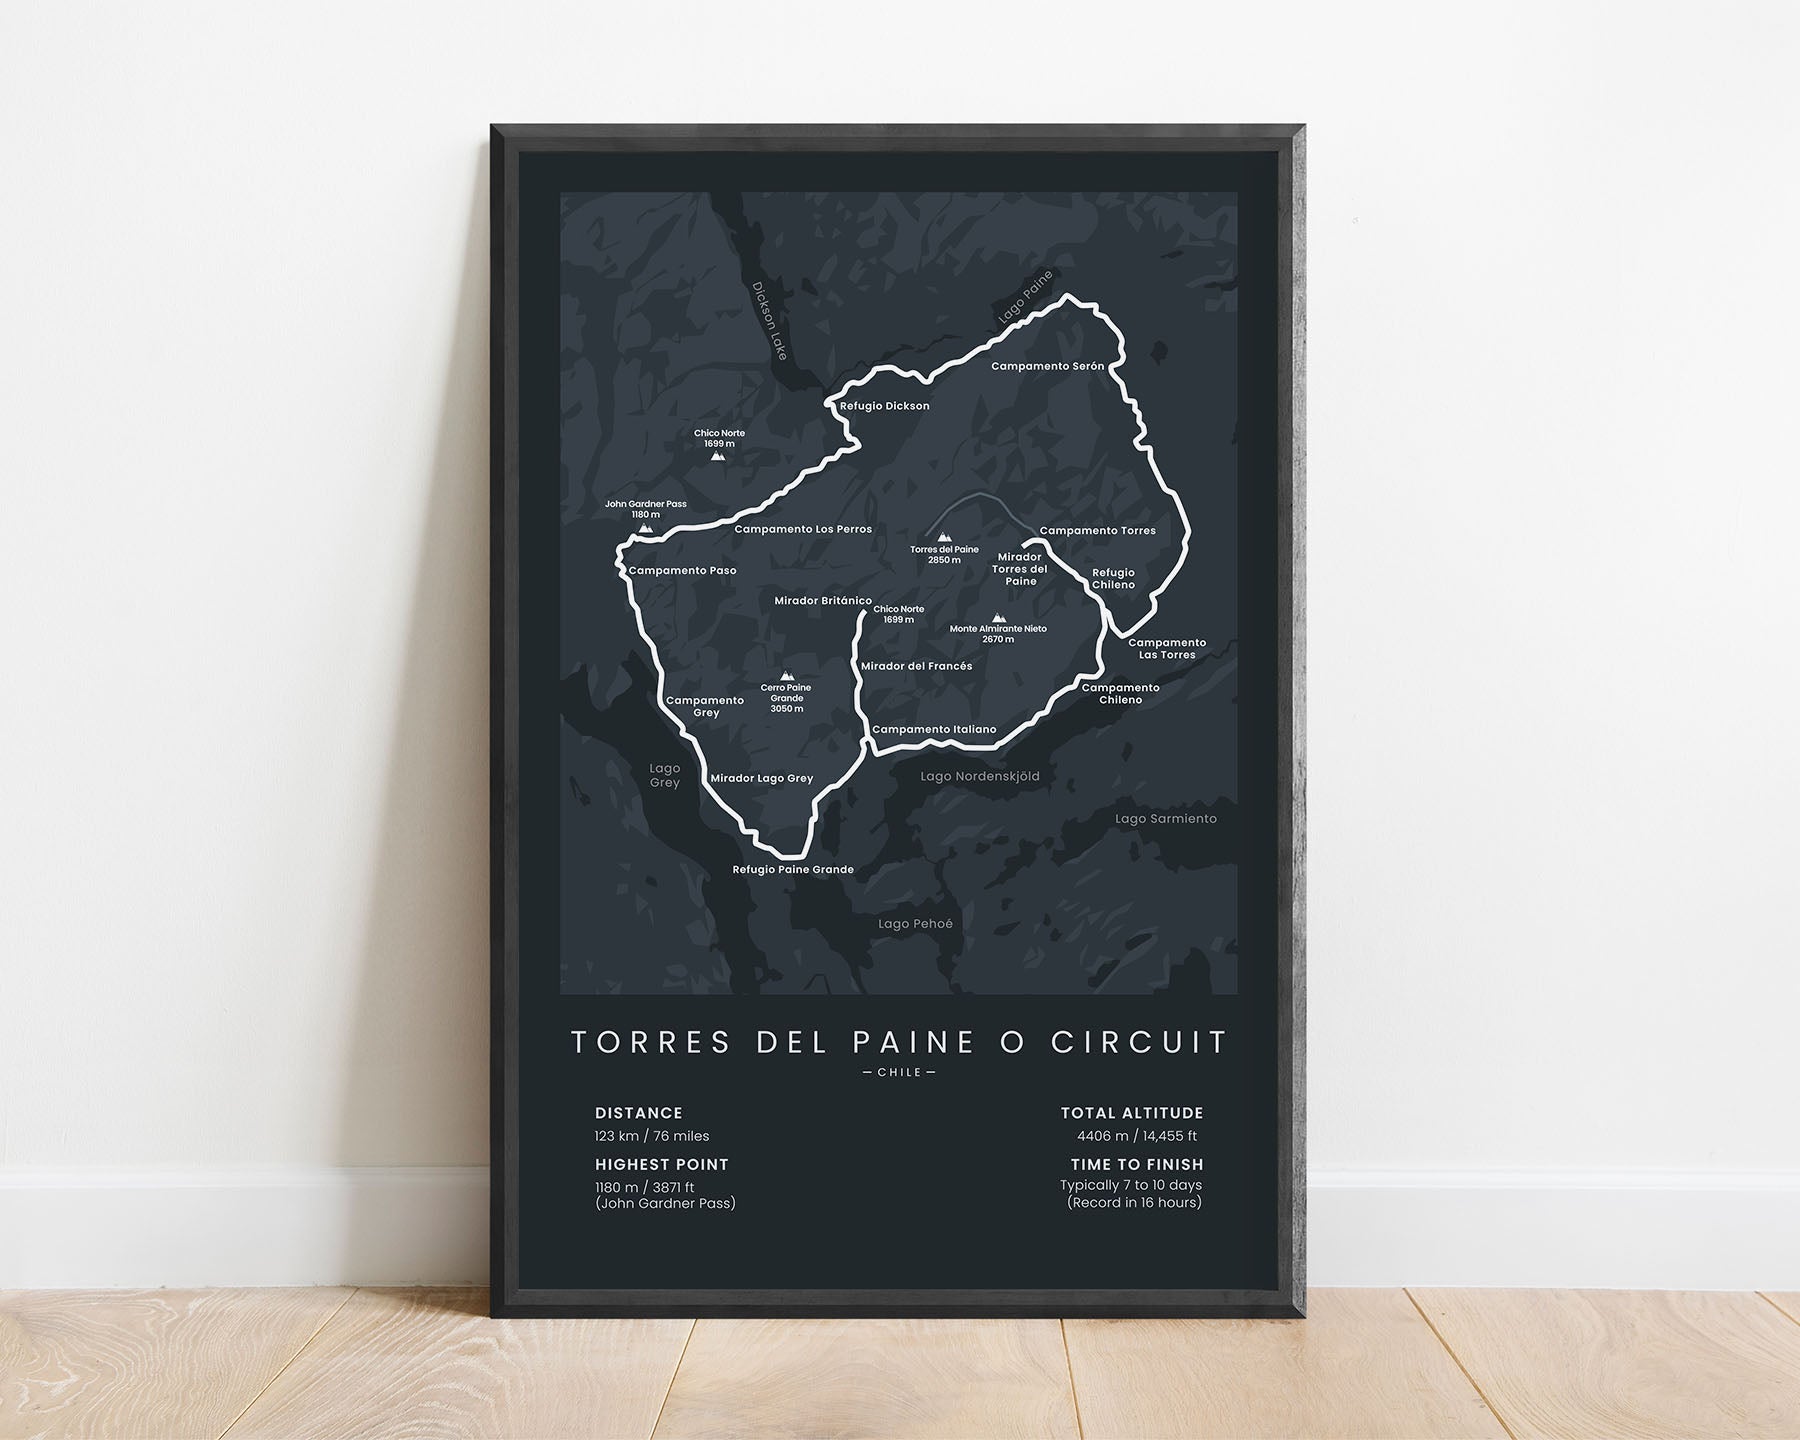 Patagonia O Circuit (South America) route print with black background